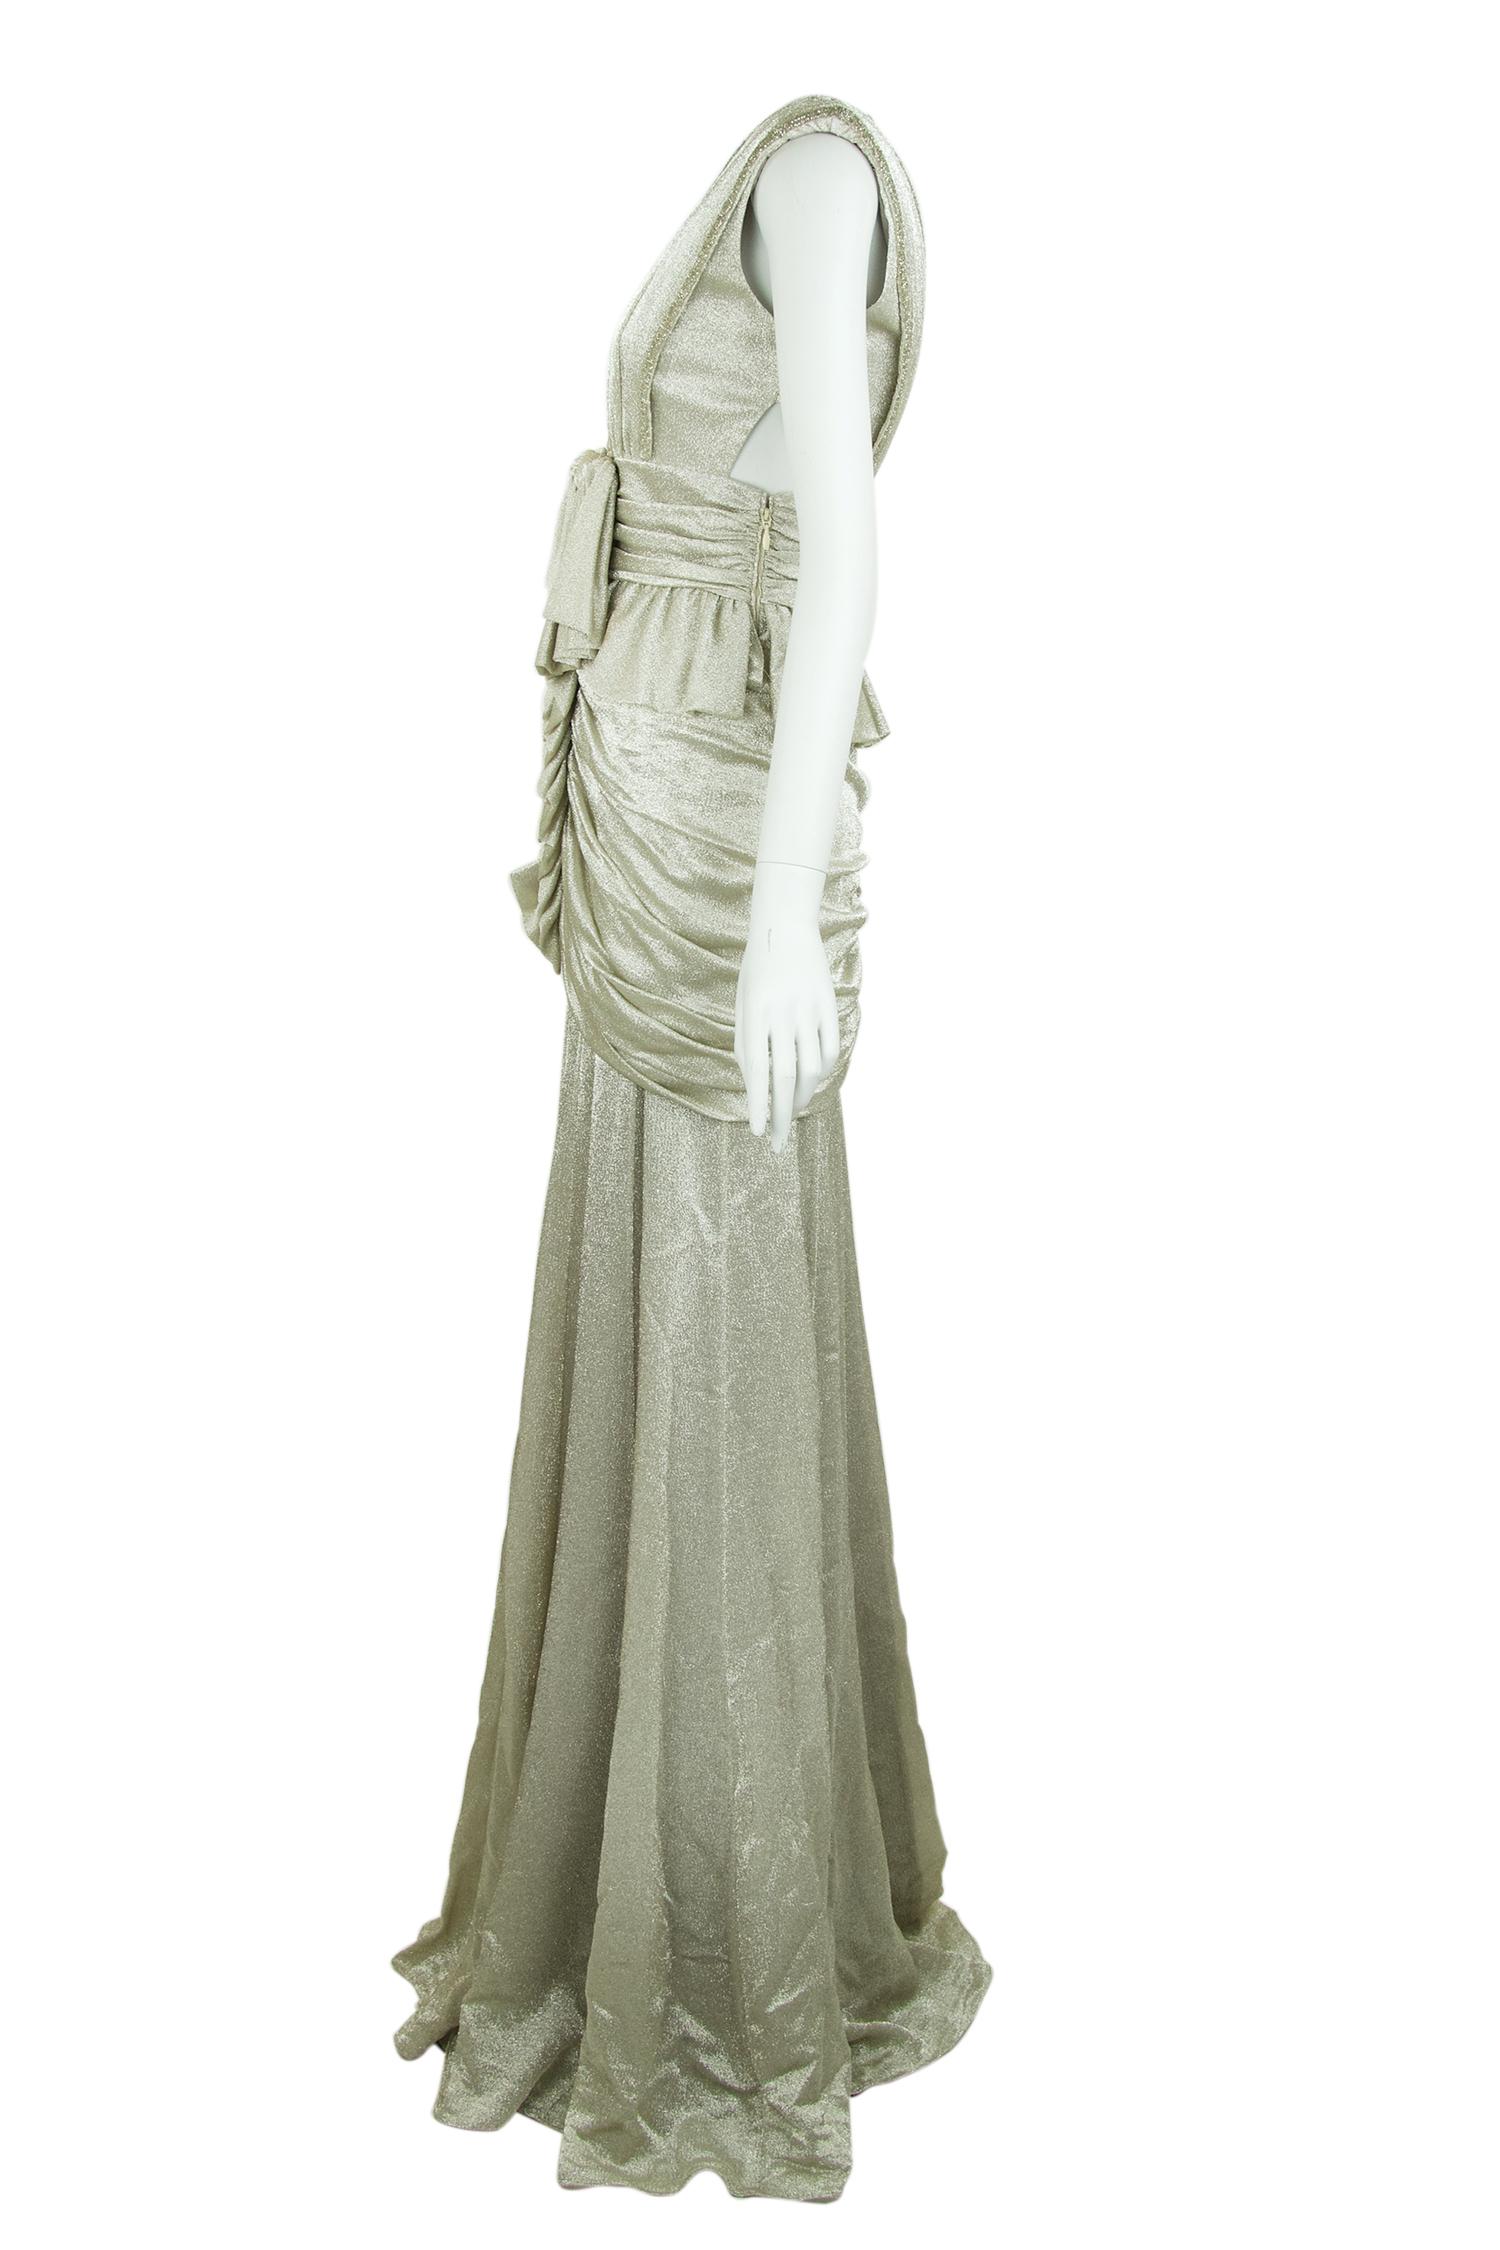 Incredible detail on this silver gown by dutch designer Viktor & Rolf.  Features gathering around the hips with a bow right below the bust.  This dress is breathtaking and will look beautiful at a formal black tie event.

Size: IT 40

Condition: